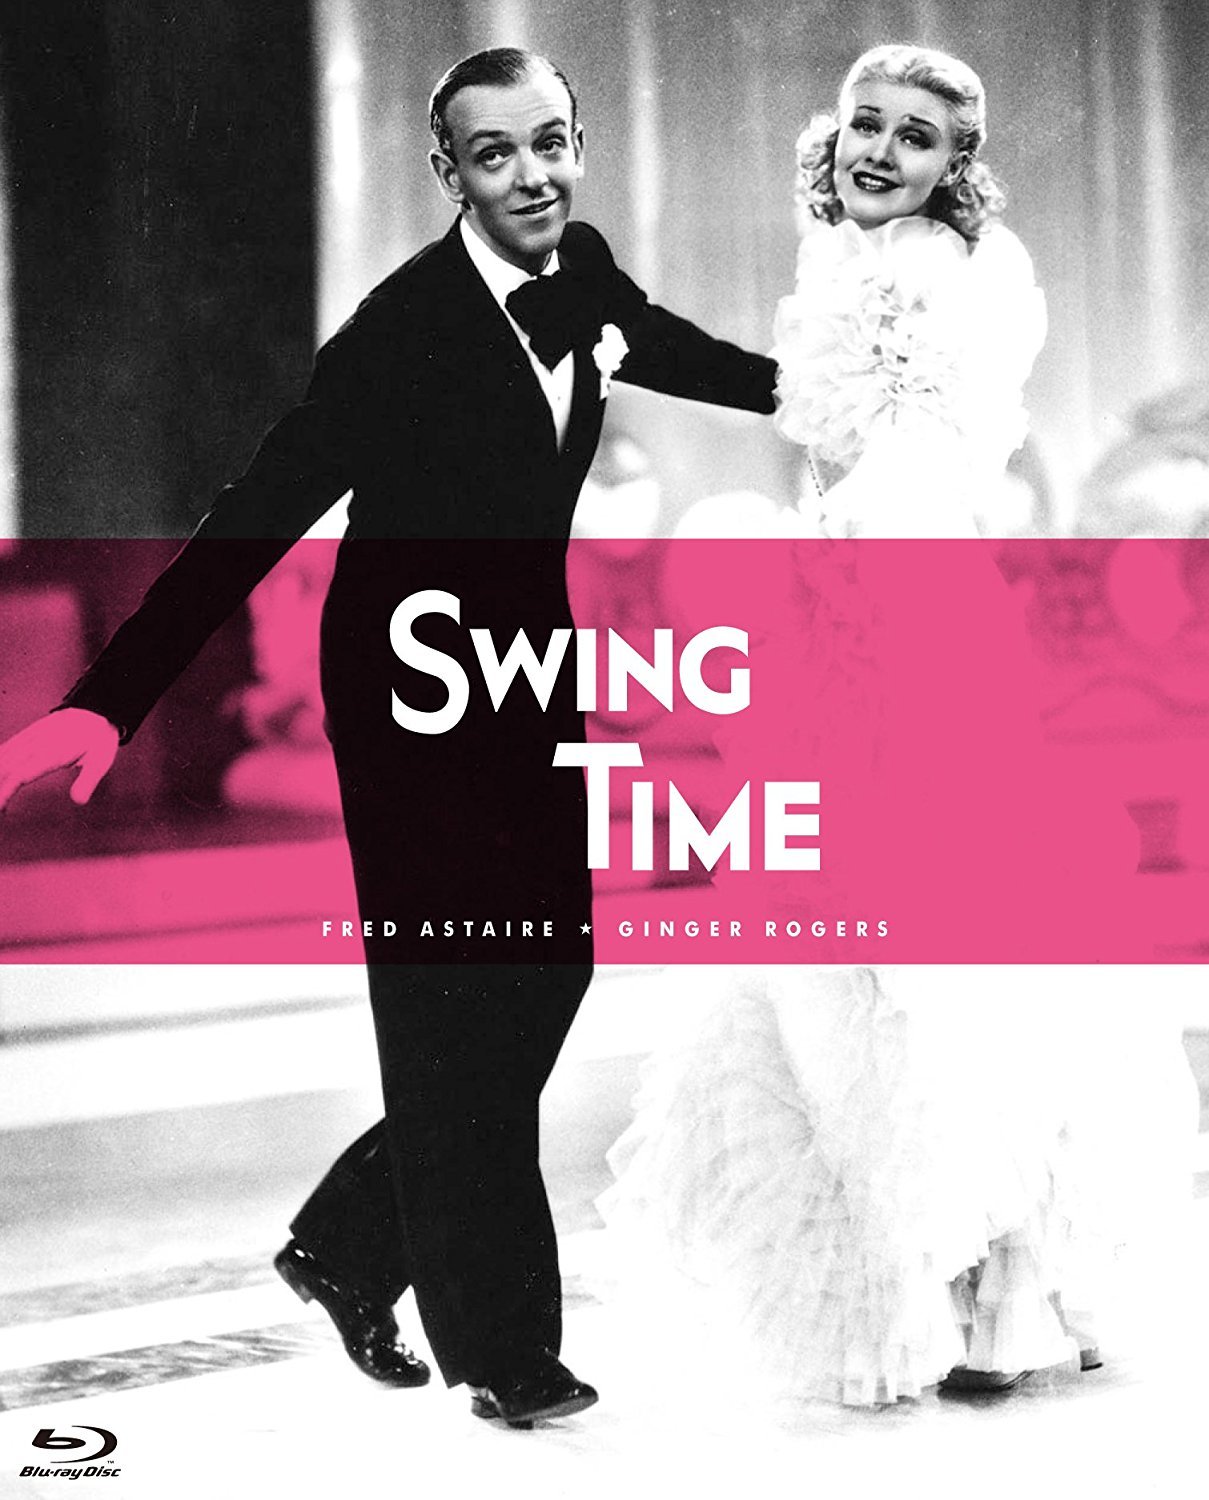 Times swinger. Swing time 1936. Время свинга. Время свинга 1936 Постер. Fred Astaire the Essential Fred Astaire.